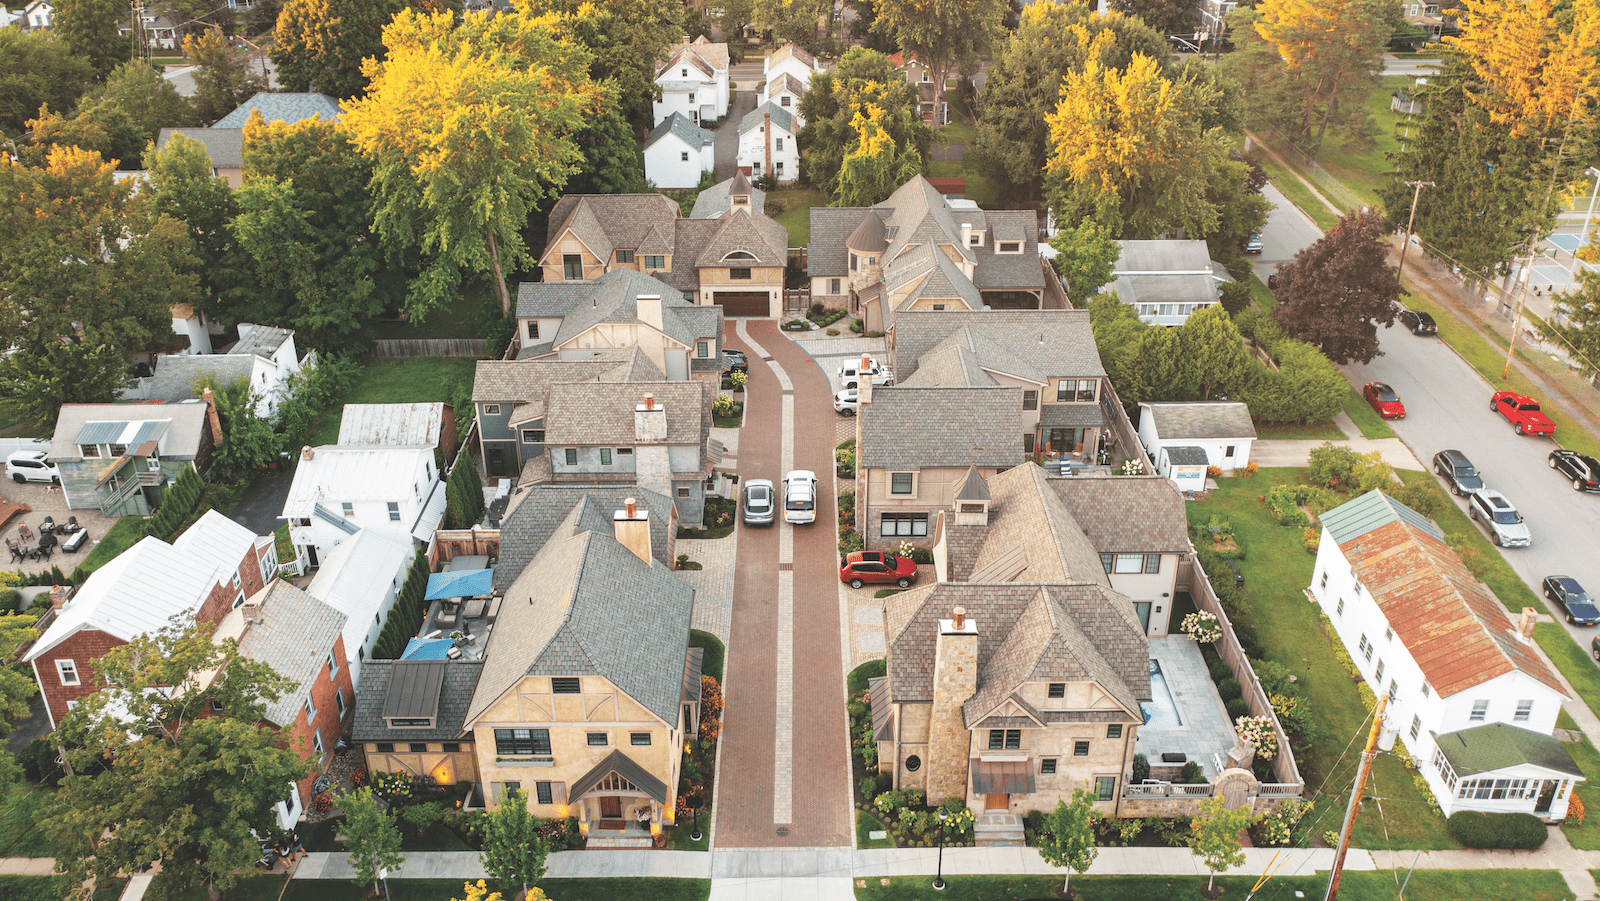 Aerial view of the Downton Walk infill development in Saratoga Springs, N.Y.